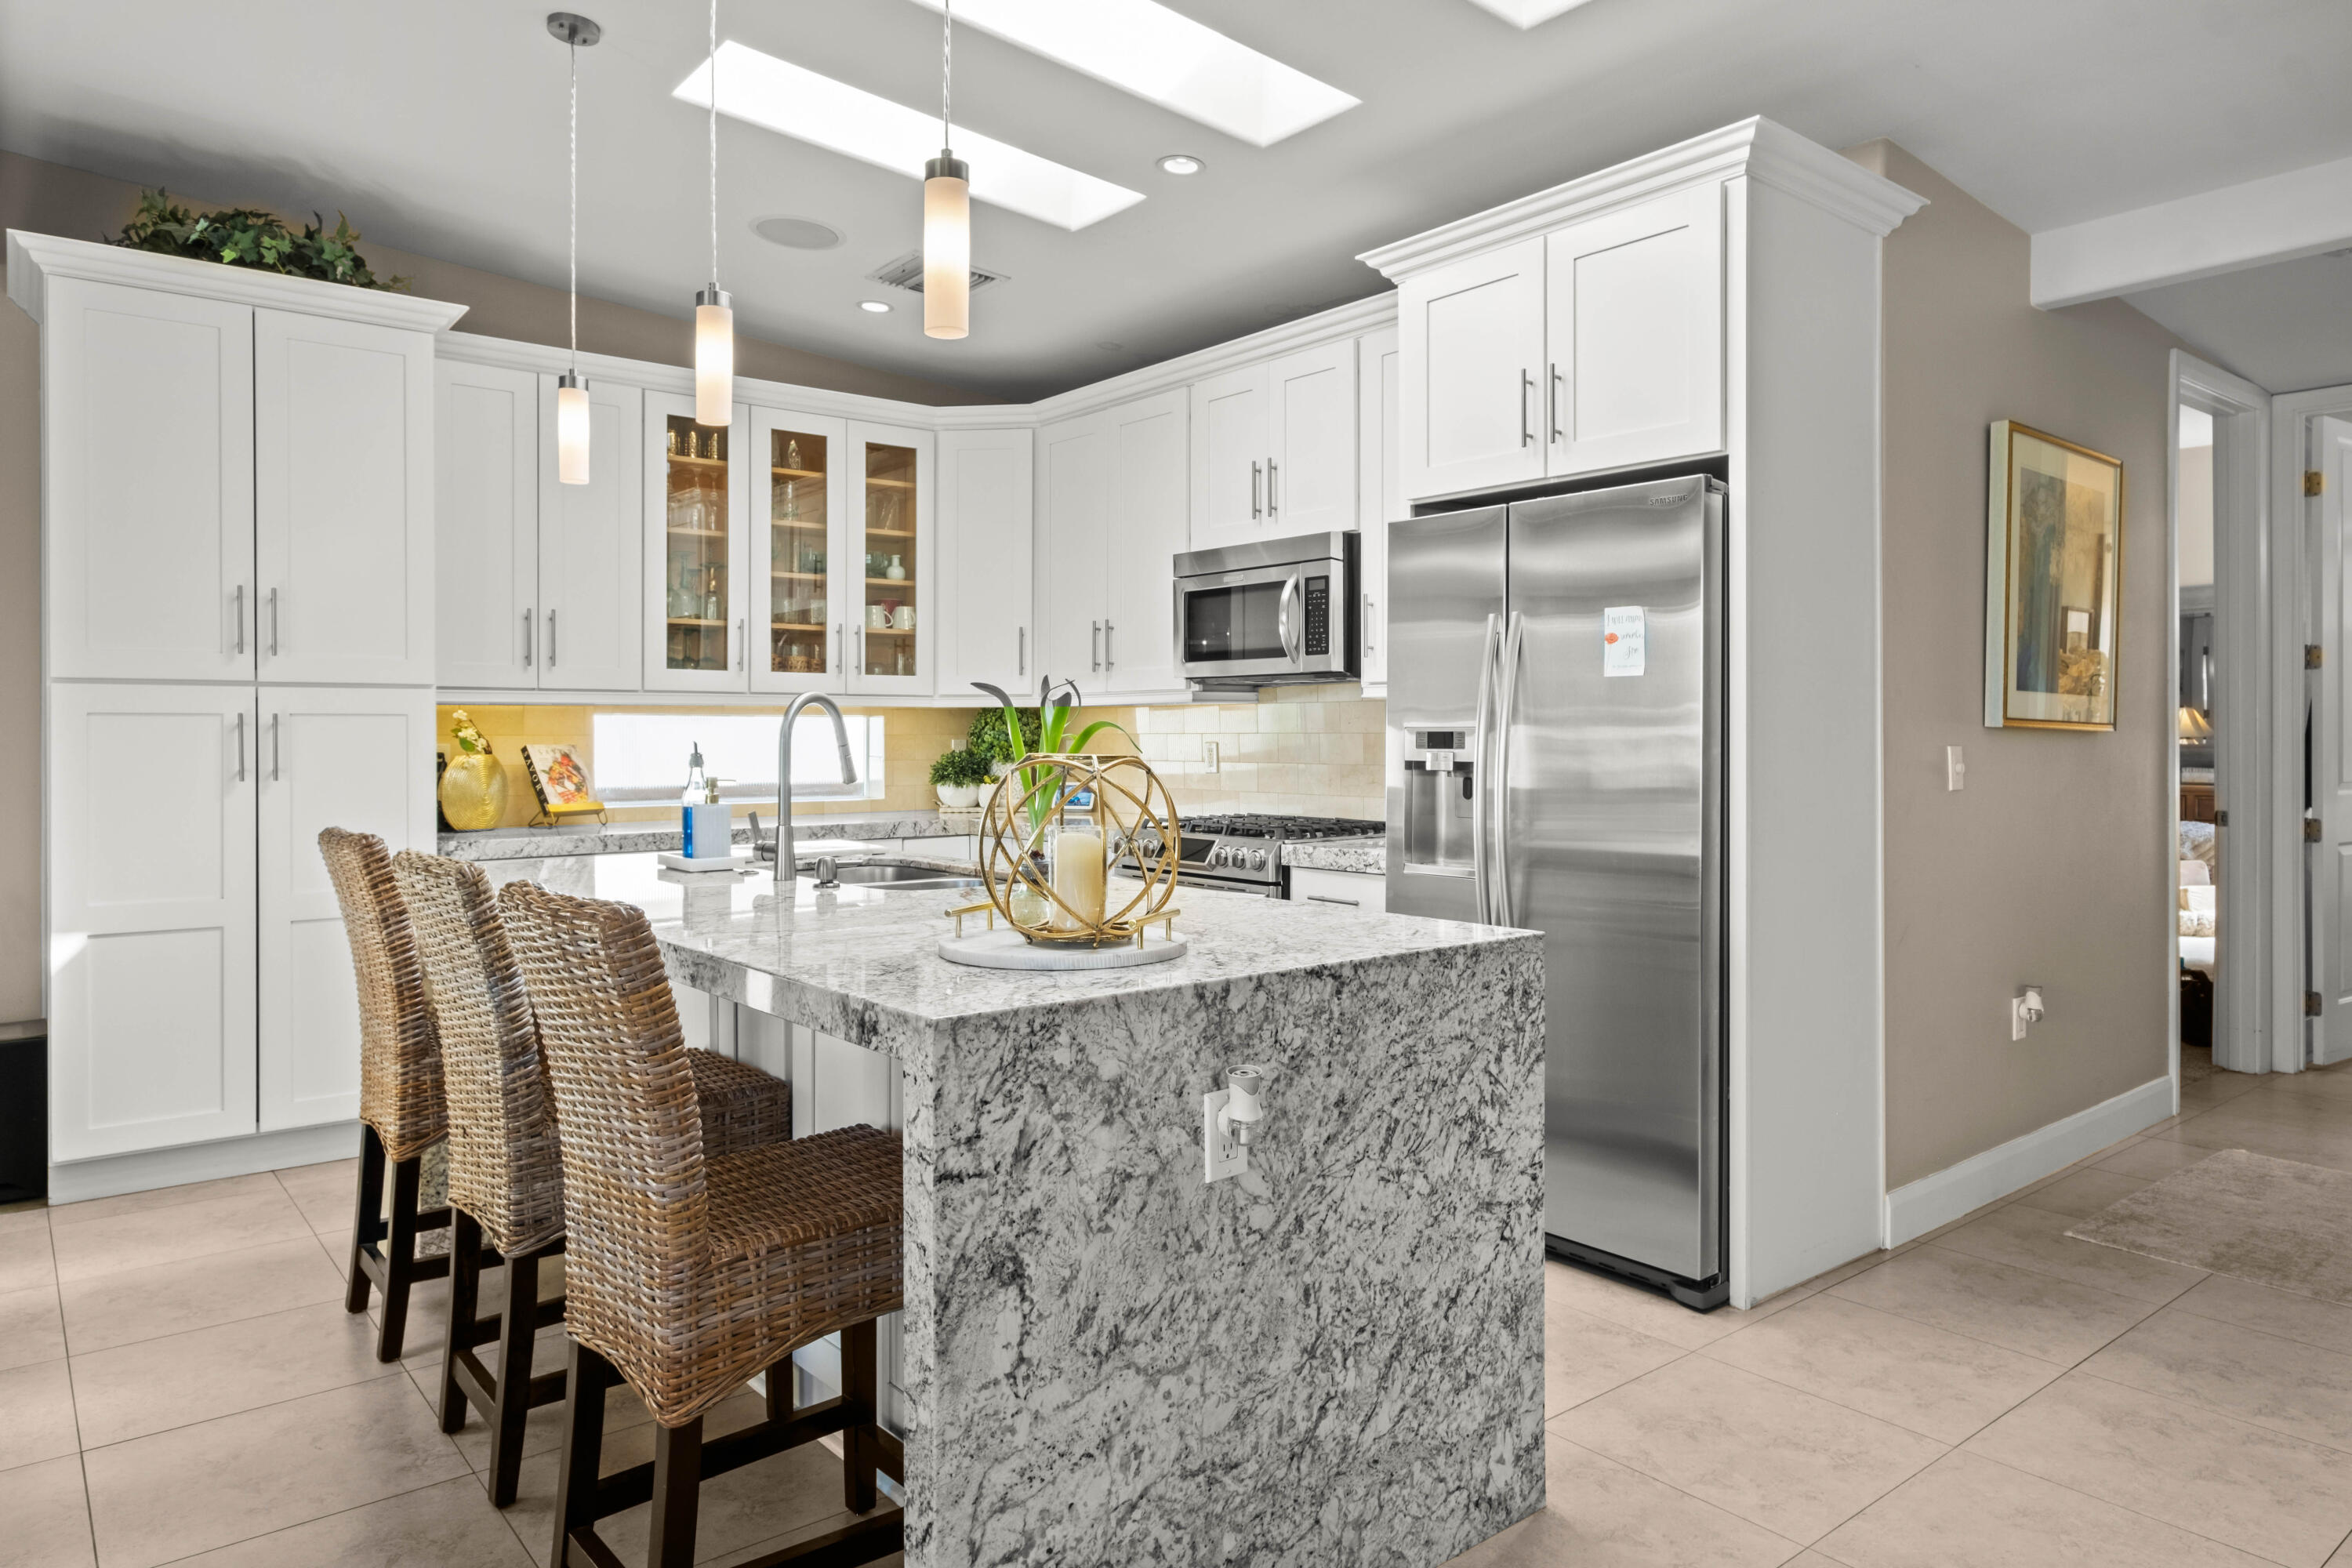 a kitchen with stainless steel appliances granite countertop a dining table chairs refrigerator and cabinets